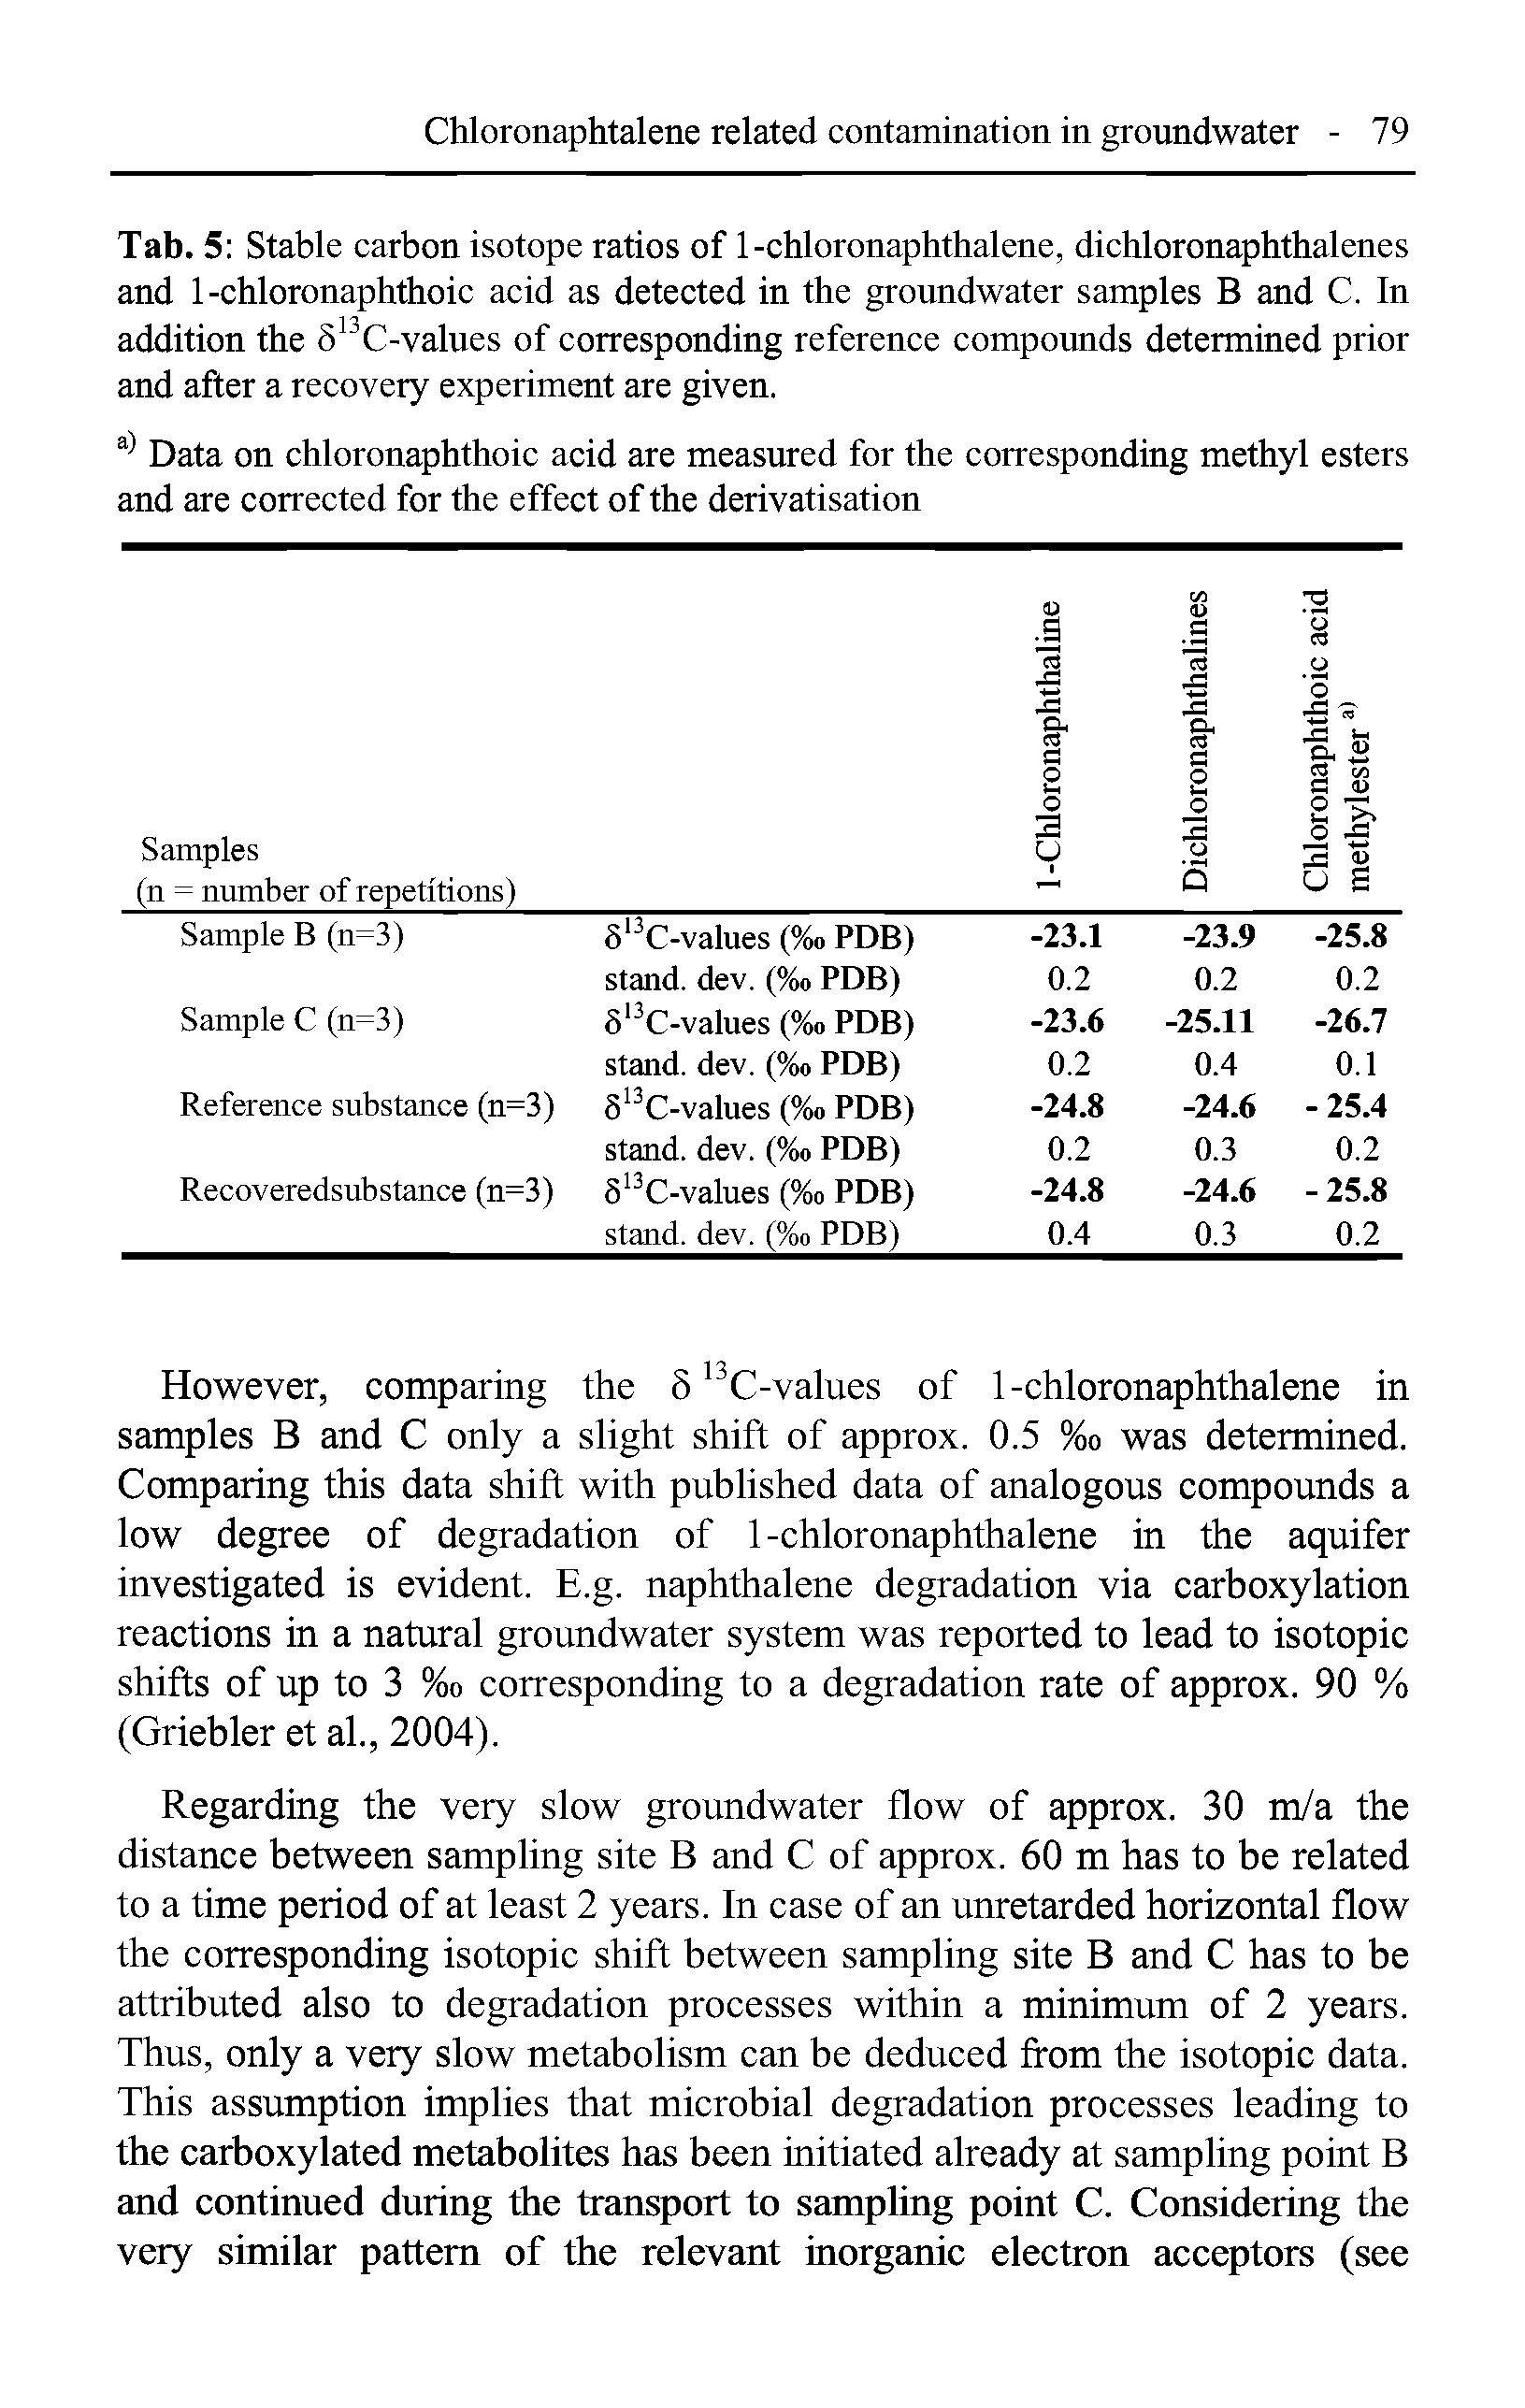 Tab. 5 Stable carbon isotope ratios of 1-chloronaphthalene, dichloronaphthalenes and 1-chloronaphthoic acid as detected in the groundwater samples B and C. In addition the 13C-values of corresponding reference compounds determined prior and after a recovery experiment are given.